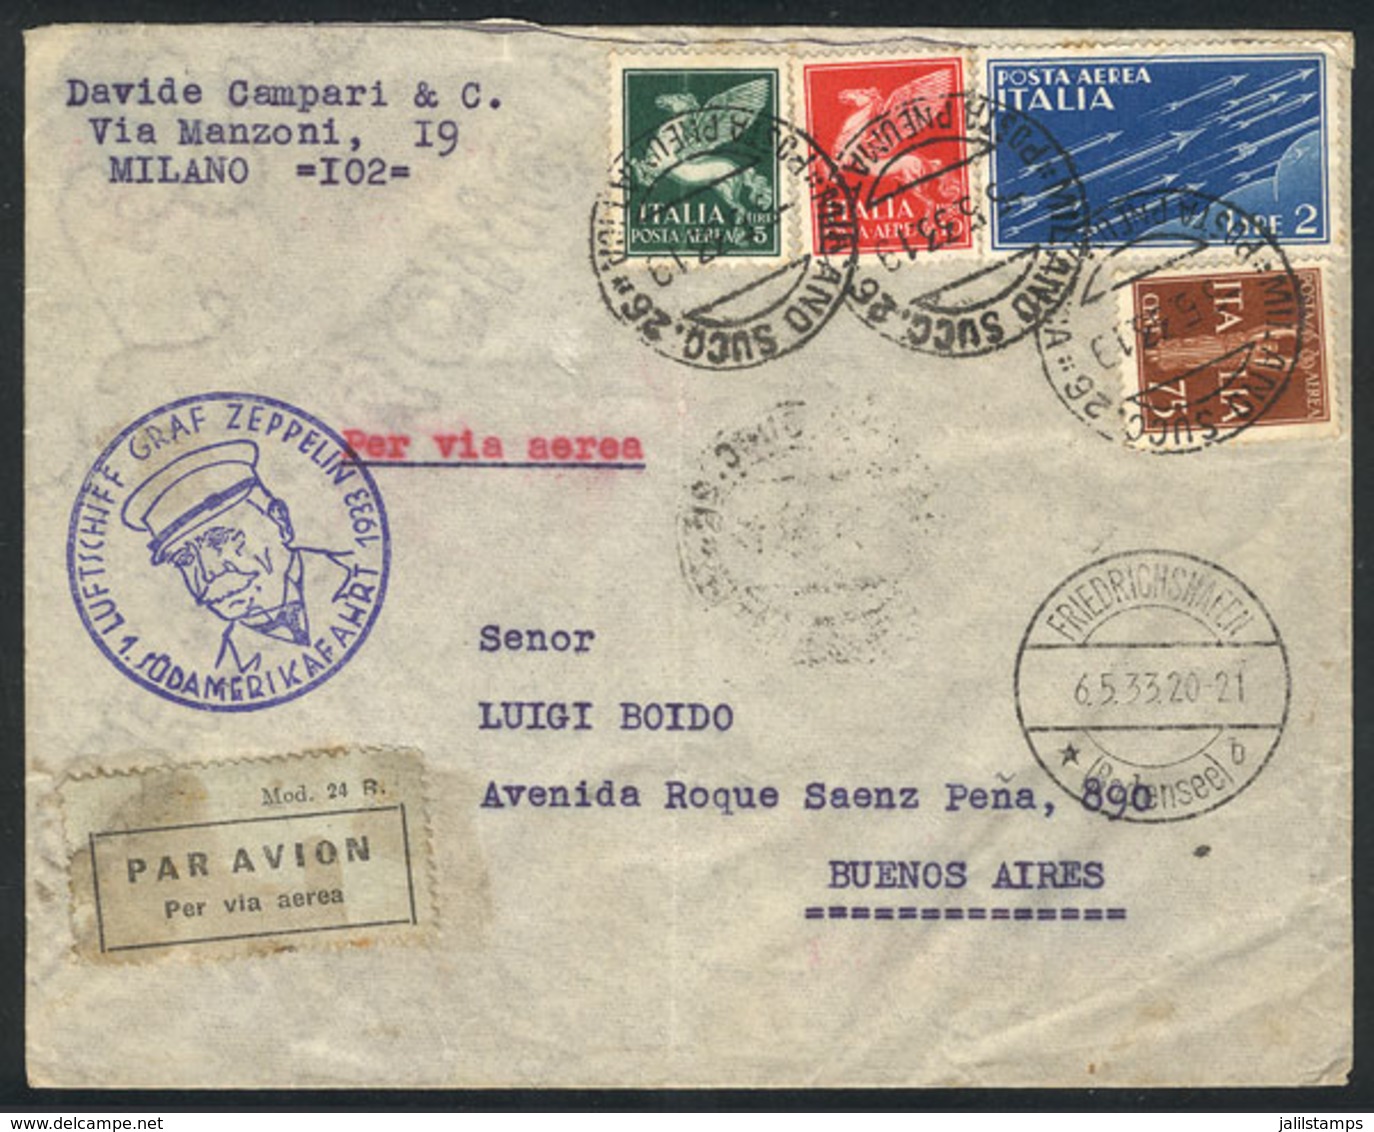 985 ITALY: Cover Flown By ZEPPELIN, Sent From Milano To Buenos Aires On 5/MAY/1933, - Unclassified